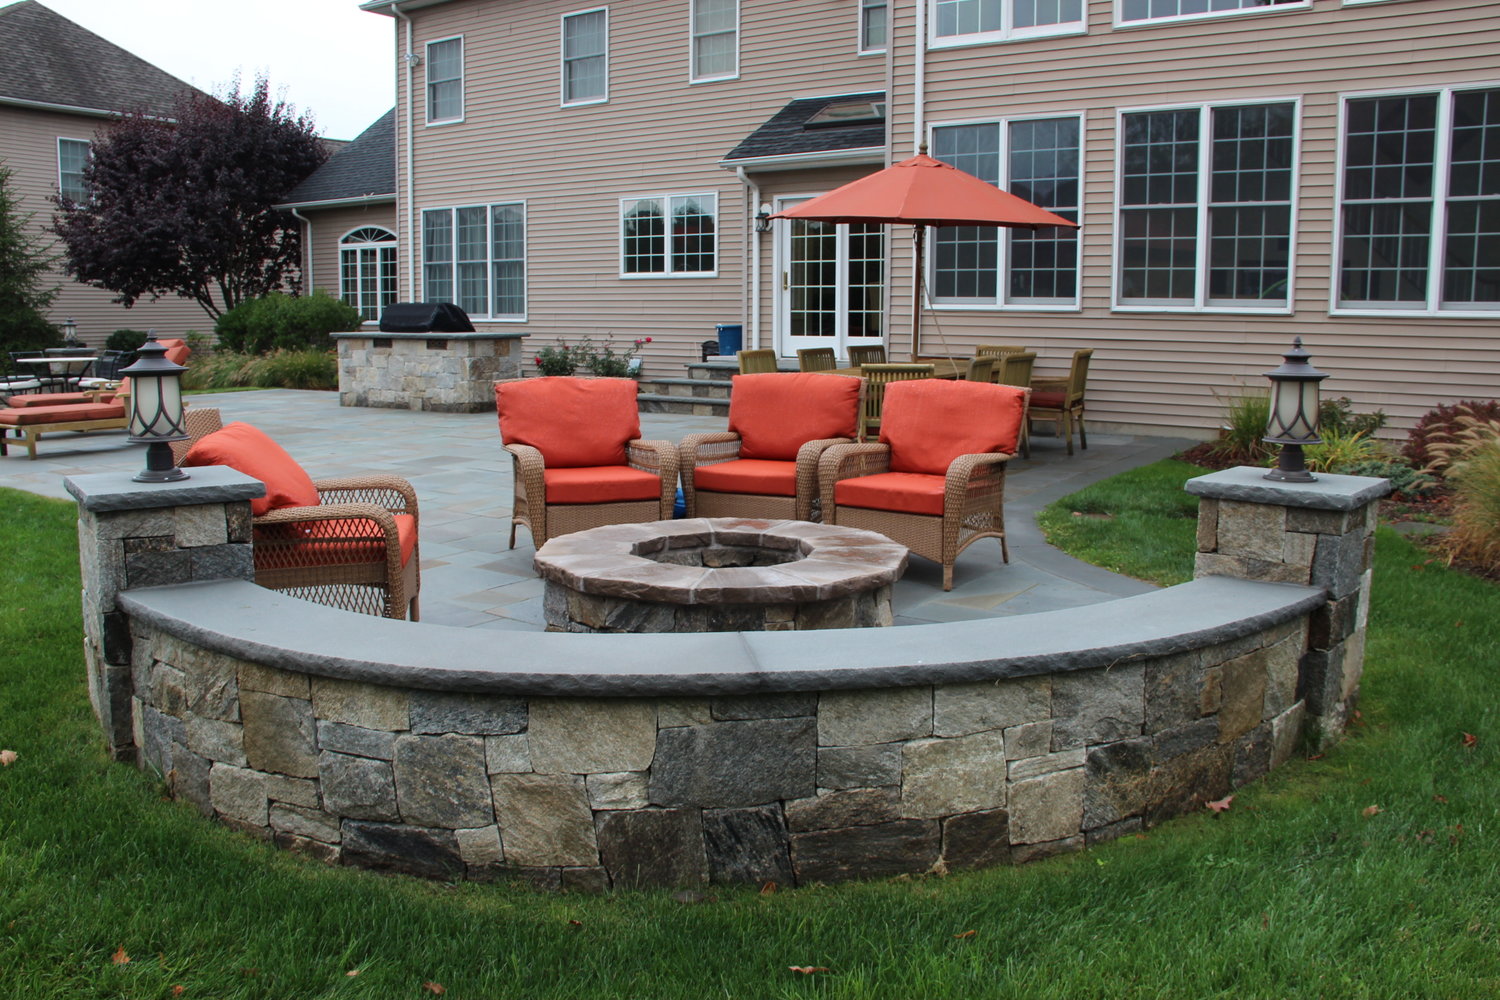 Fire Pit To Your Outdoor Patio, Pictures Of Patio Fire Pits